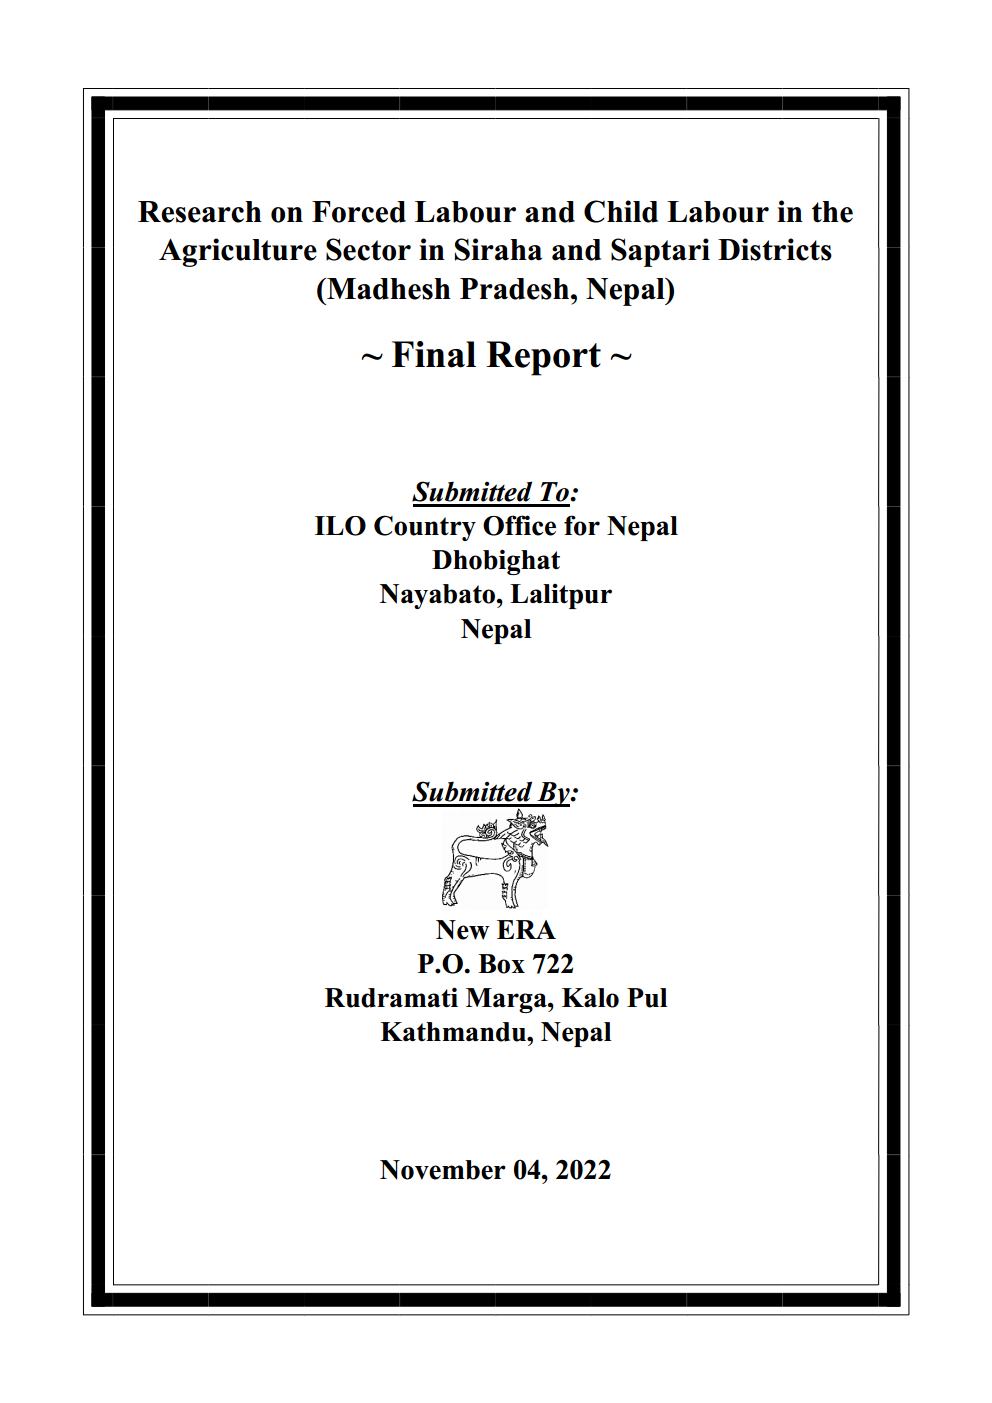 Research on Forced Labor and Child Labor in the Agriculture Sector in Siraha and Saptari Districts of Province 2